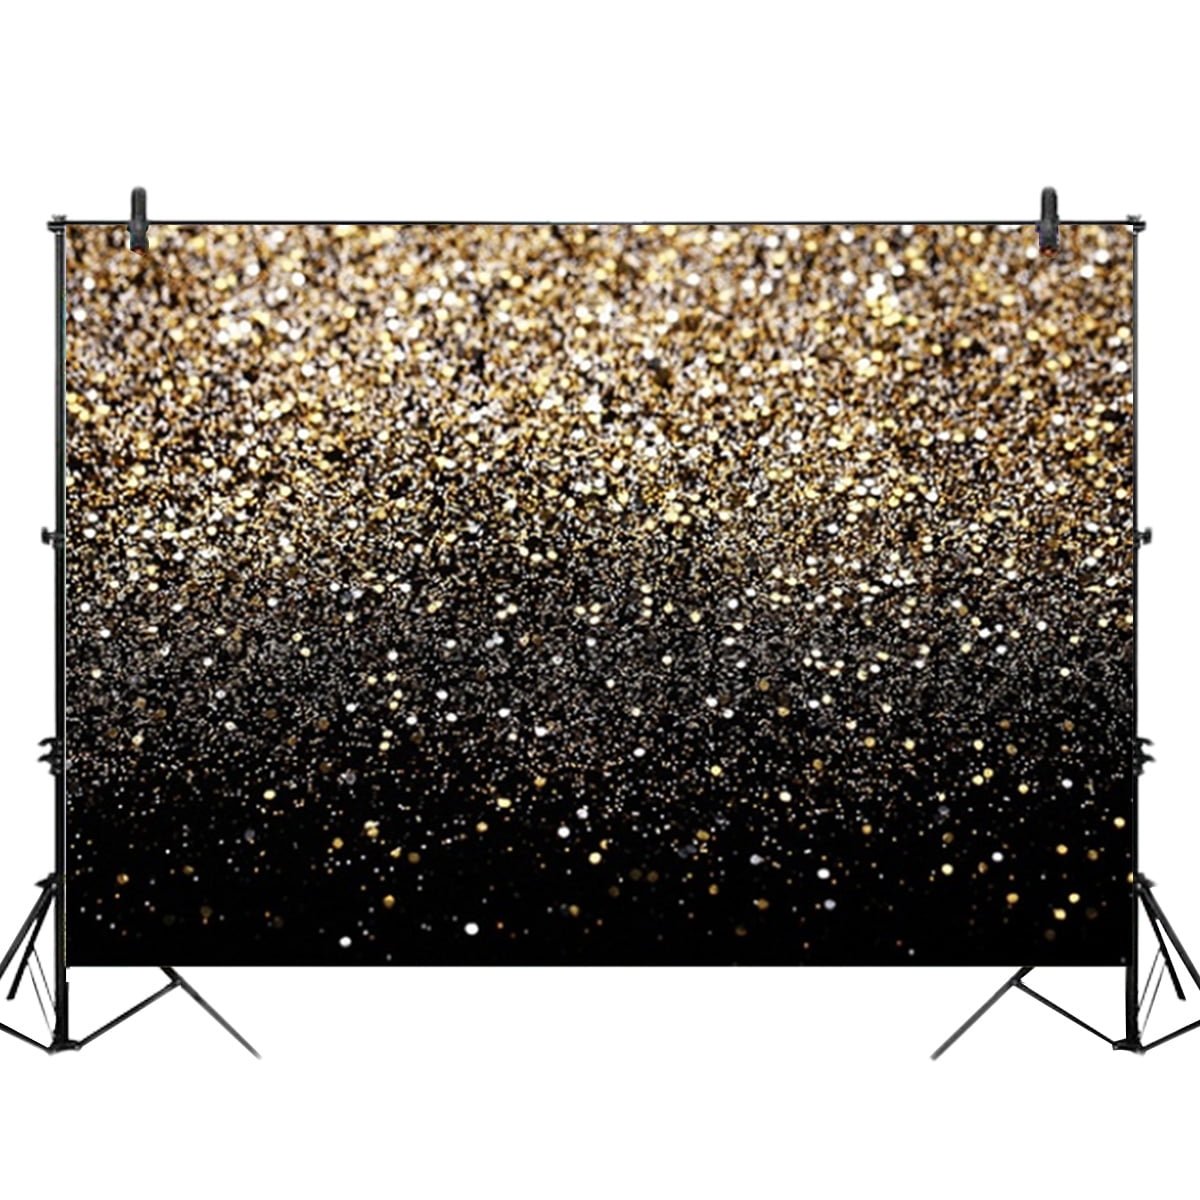 7X5ft Colorful Bokeh Ivory Gold Photography Backdrop Spots Shinning Sparkle Sand Scale Halo Still Life Colorful Background Newborn Baby Portrait Photo Studio Family Party 10x10ft,chy486